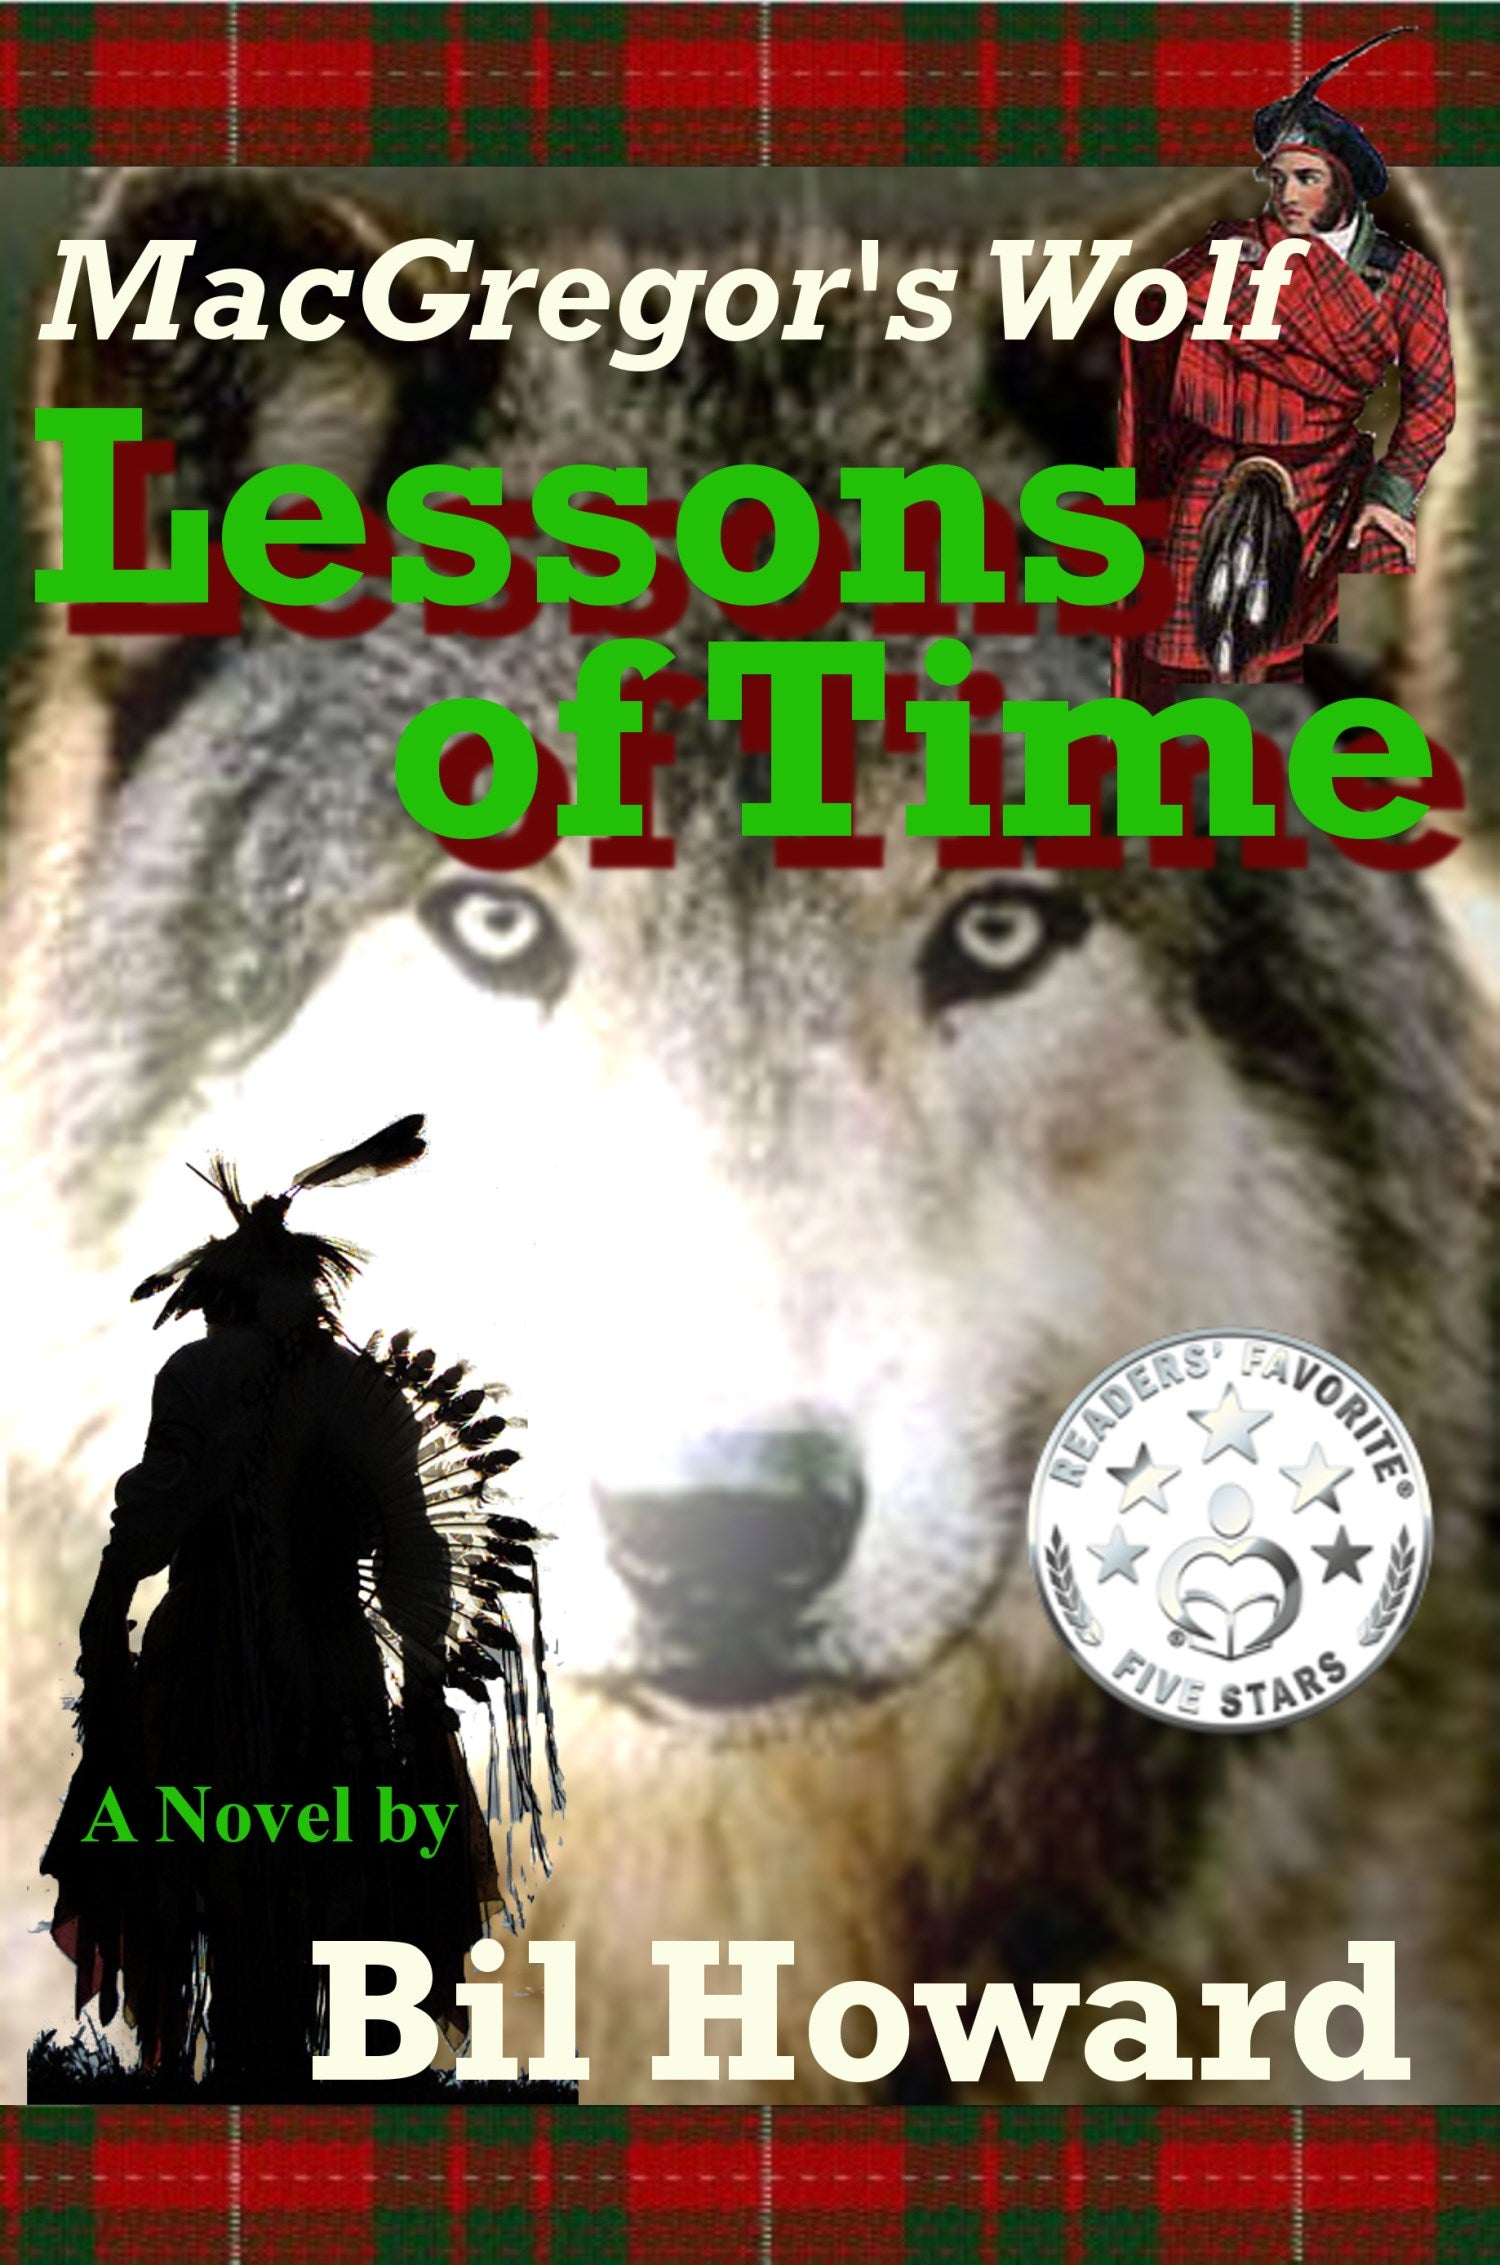 Book Review: MacGregor's Wolf--Lessons of Time by Bill Howard